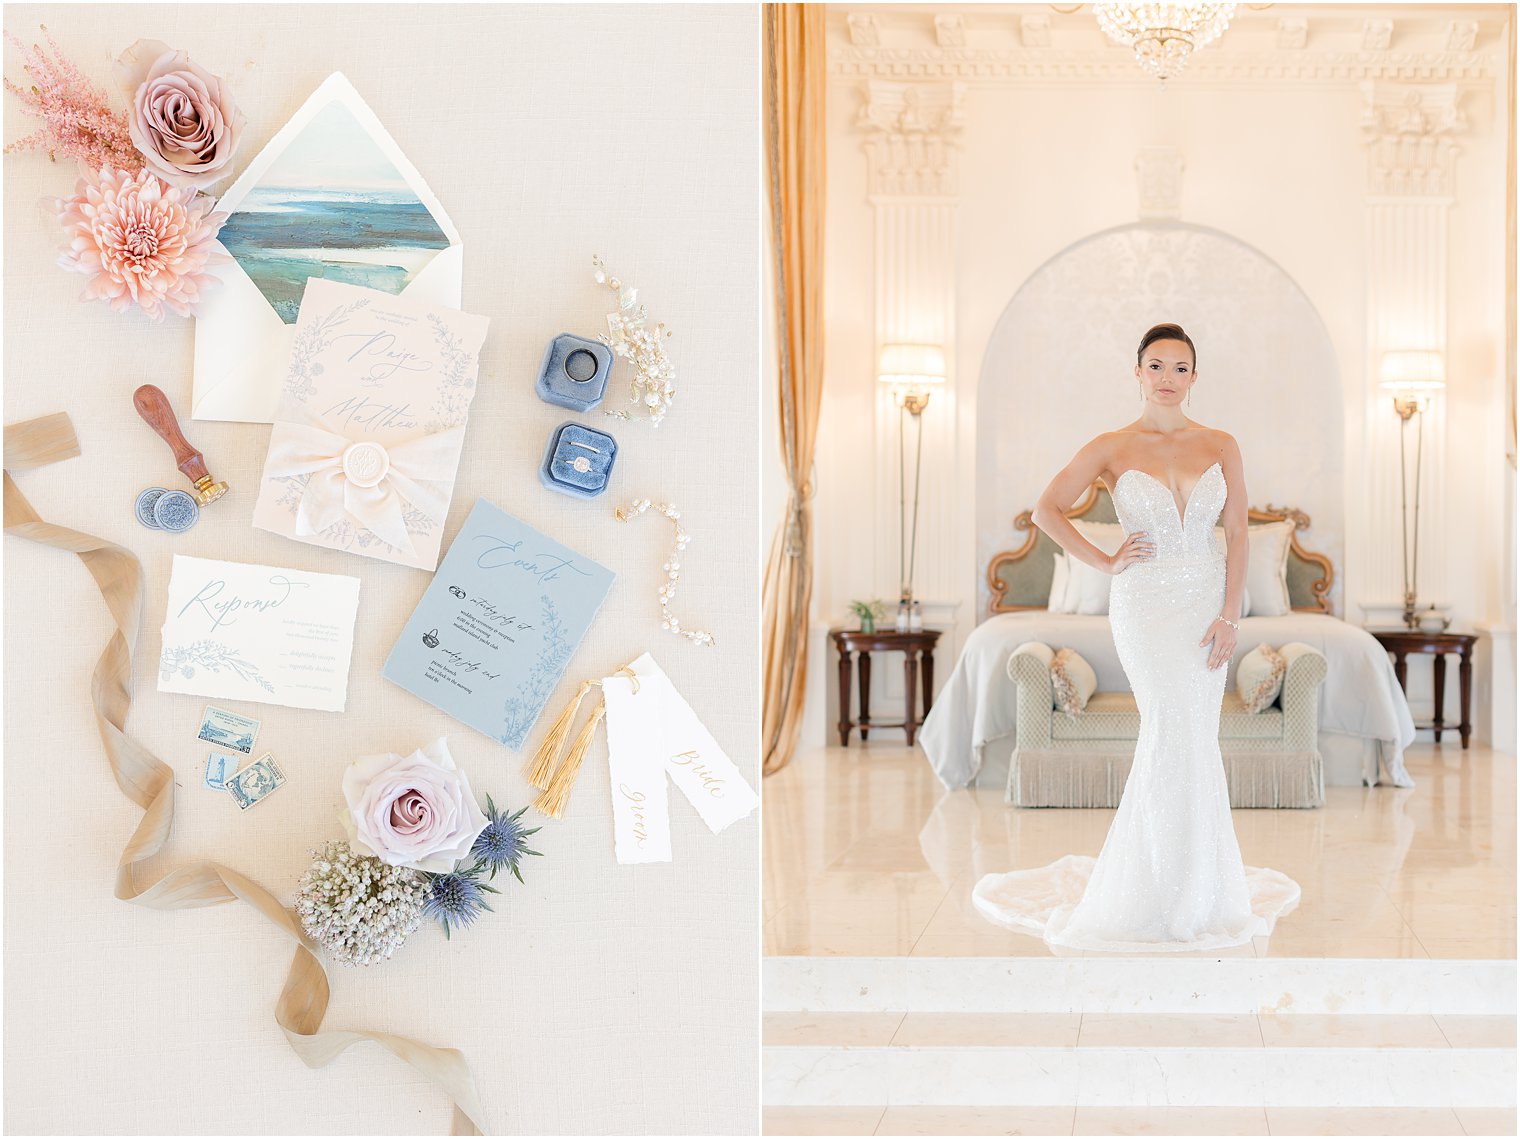 bride poses in strapless dress by bed in bridal suite at Mallard Island Yacht Club